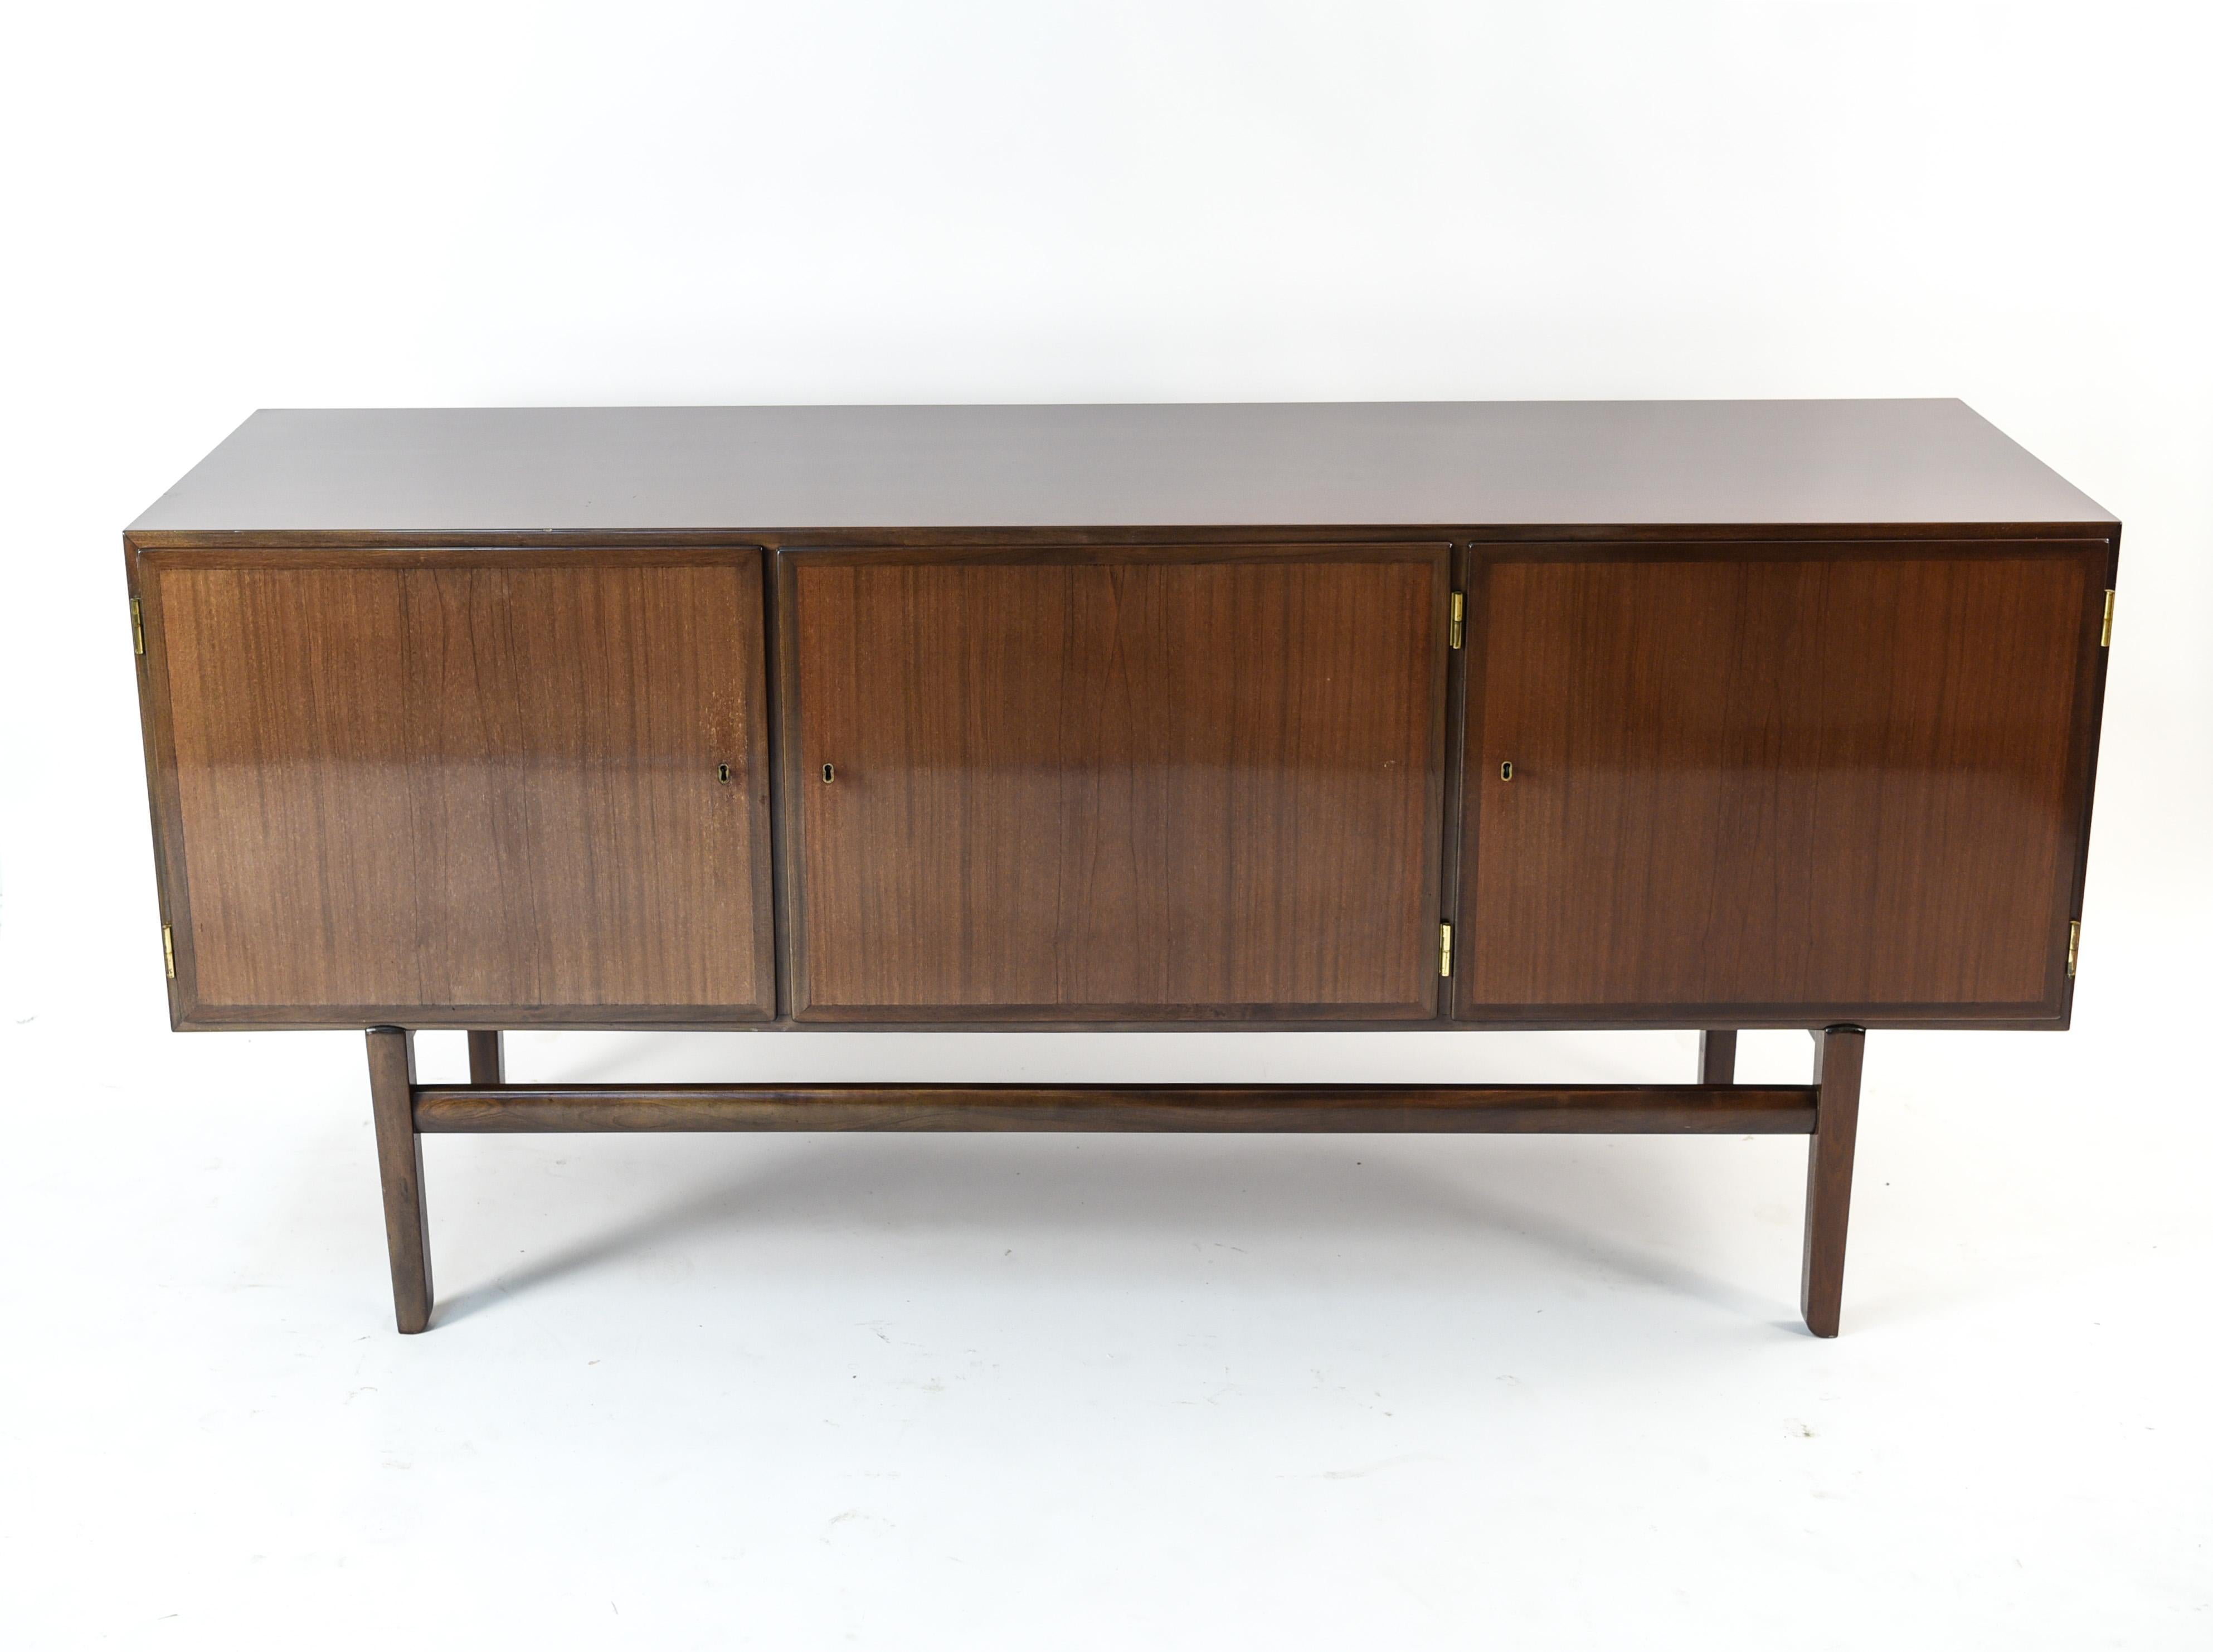 Danish Ole Wanscher for Poul Jeppesen Rungstedlund Mahogany Sideboard